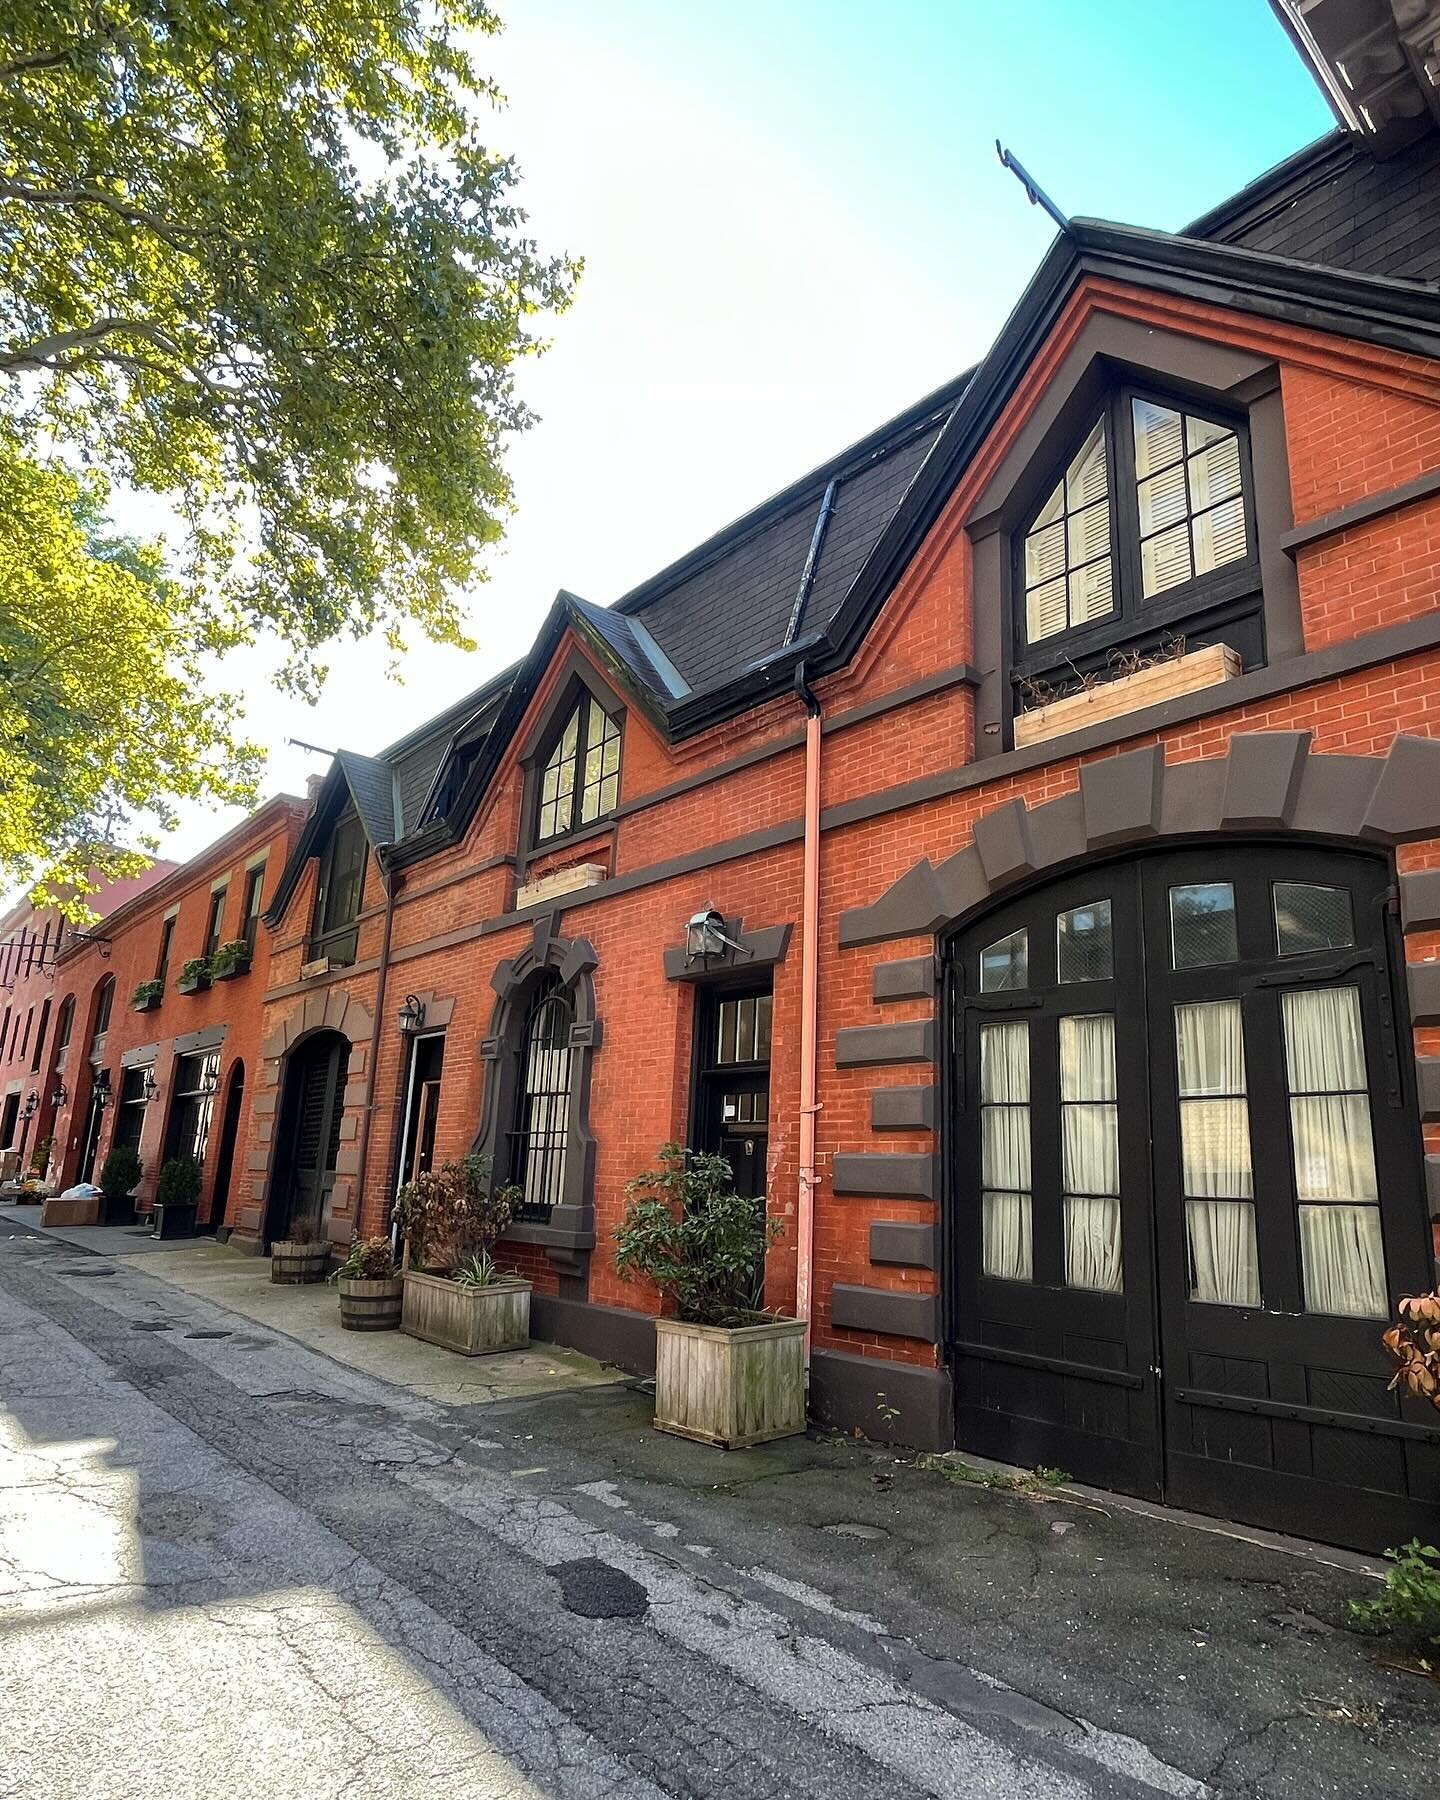 You know you&rsquo;re in a very old and well preserved neighborhood when you find carriage stable alleys!  Join us on a Brooklyn Heights History Tour and we&rsquo;ll show you around one of the finest residential neighborhoods in the United States.
.
